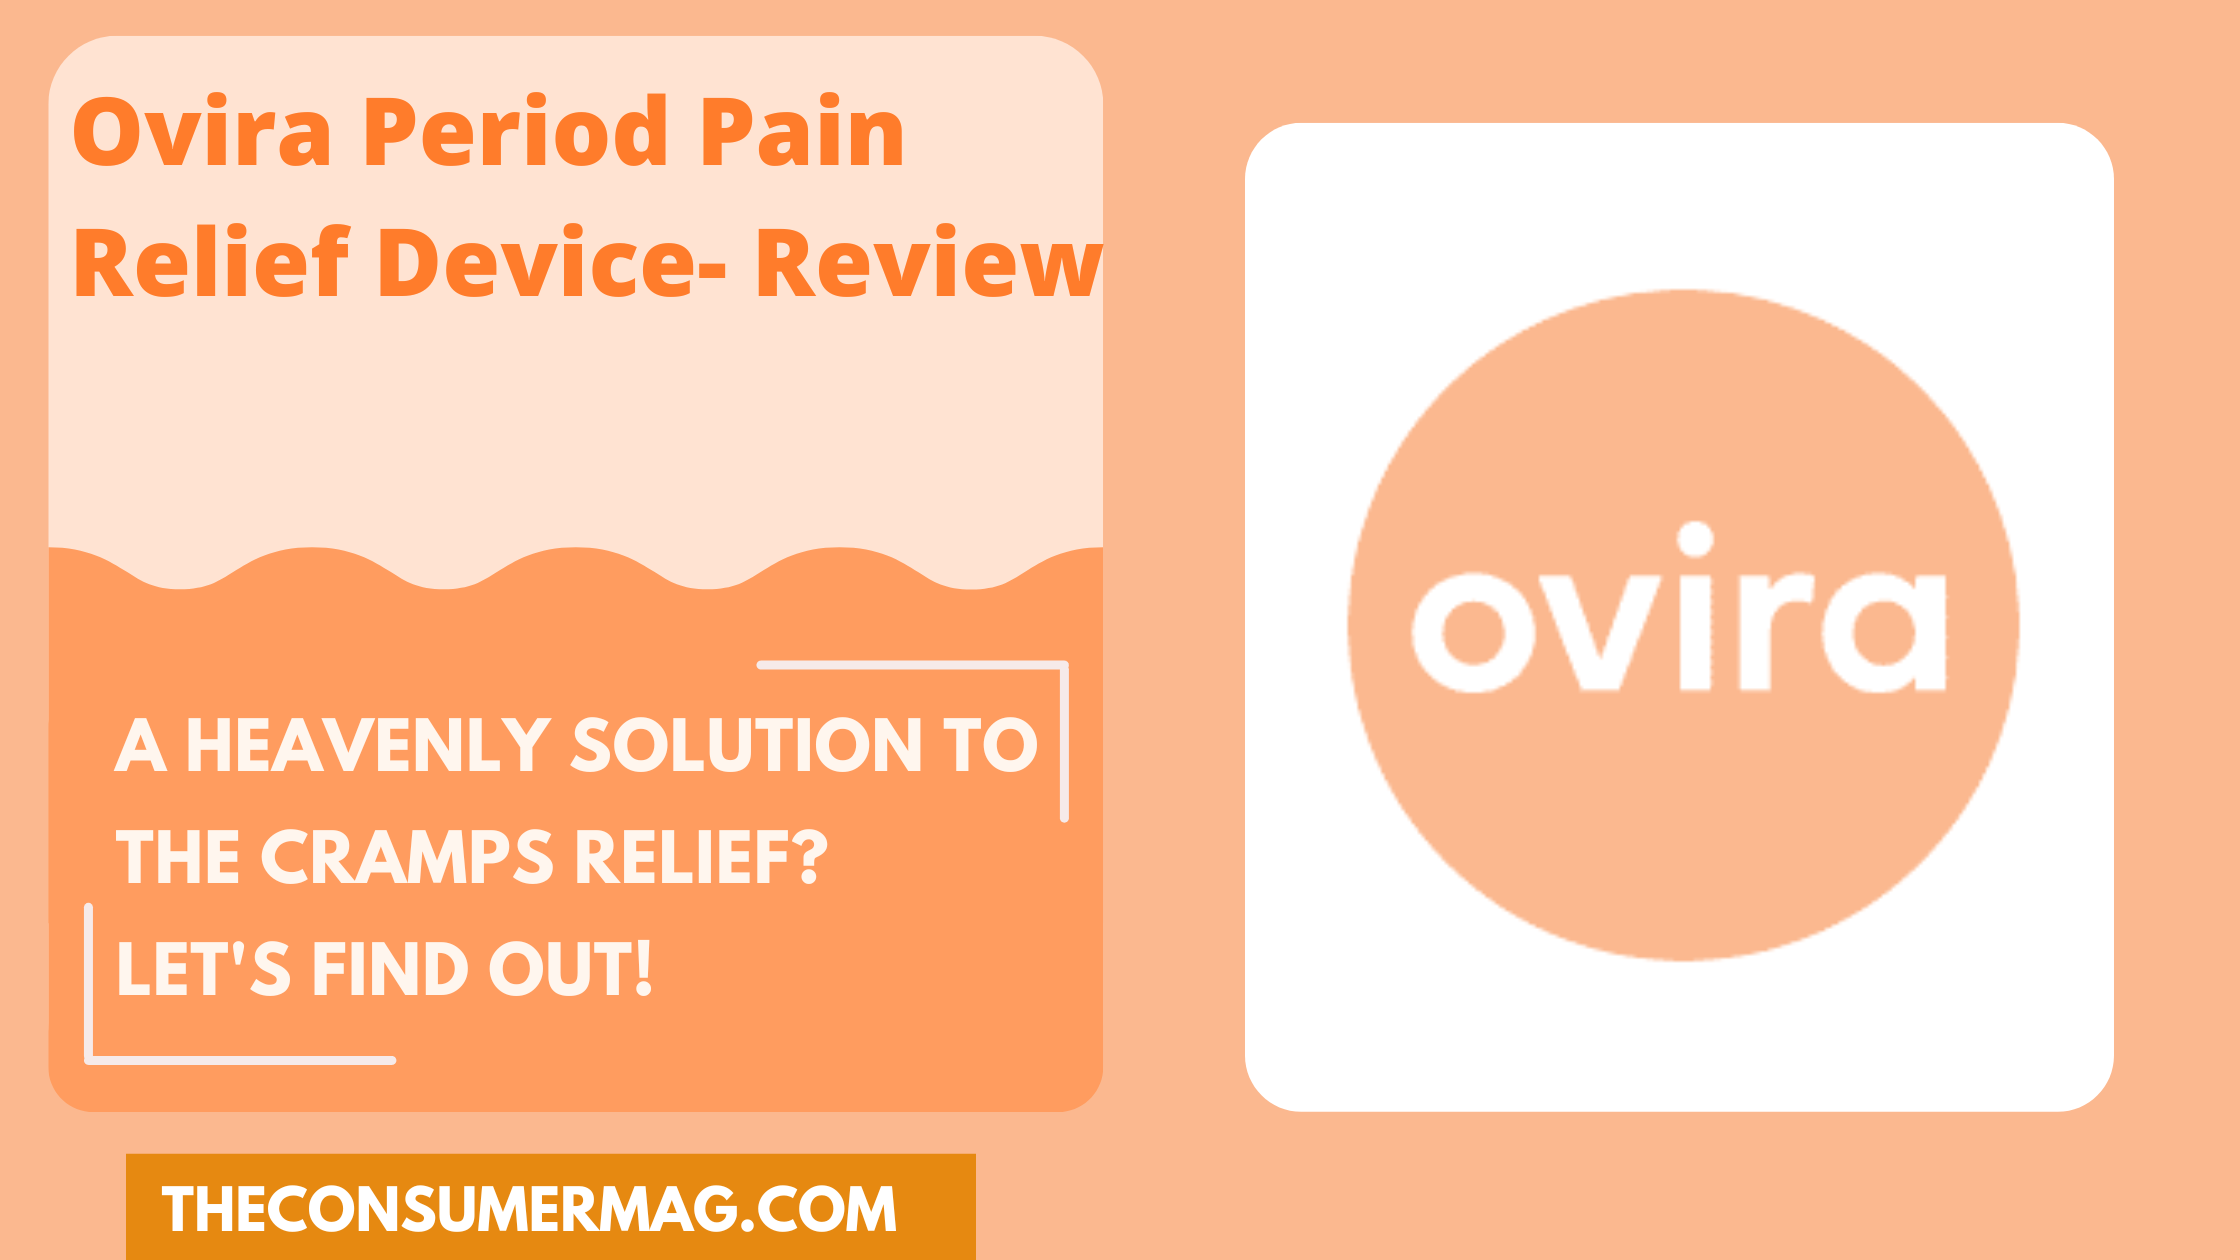 Ovira Period Pain Relief Device featured image